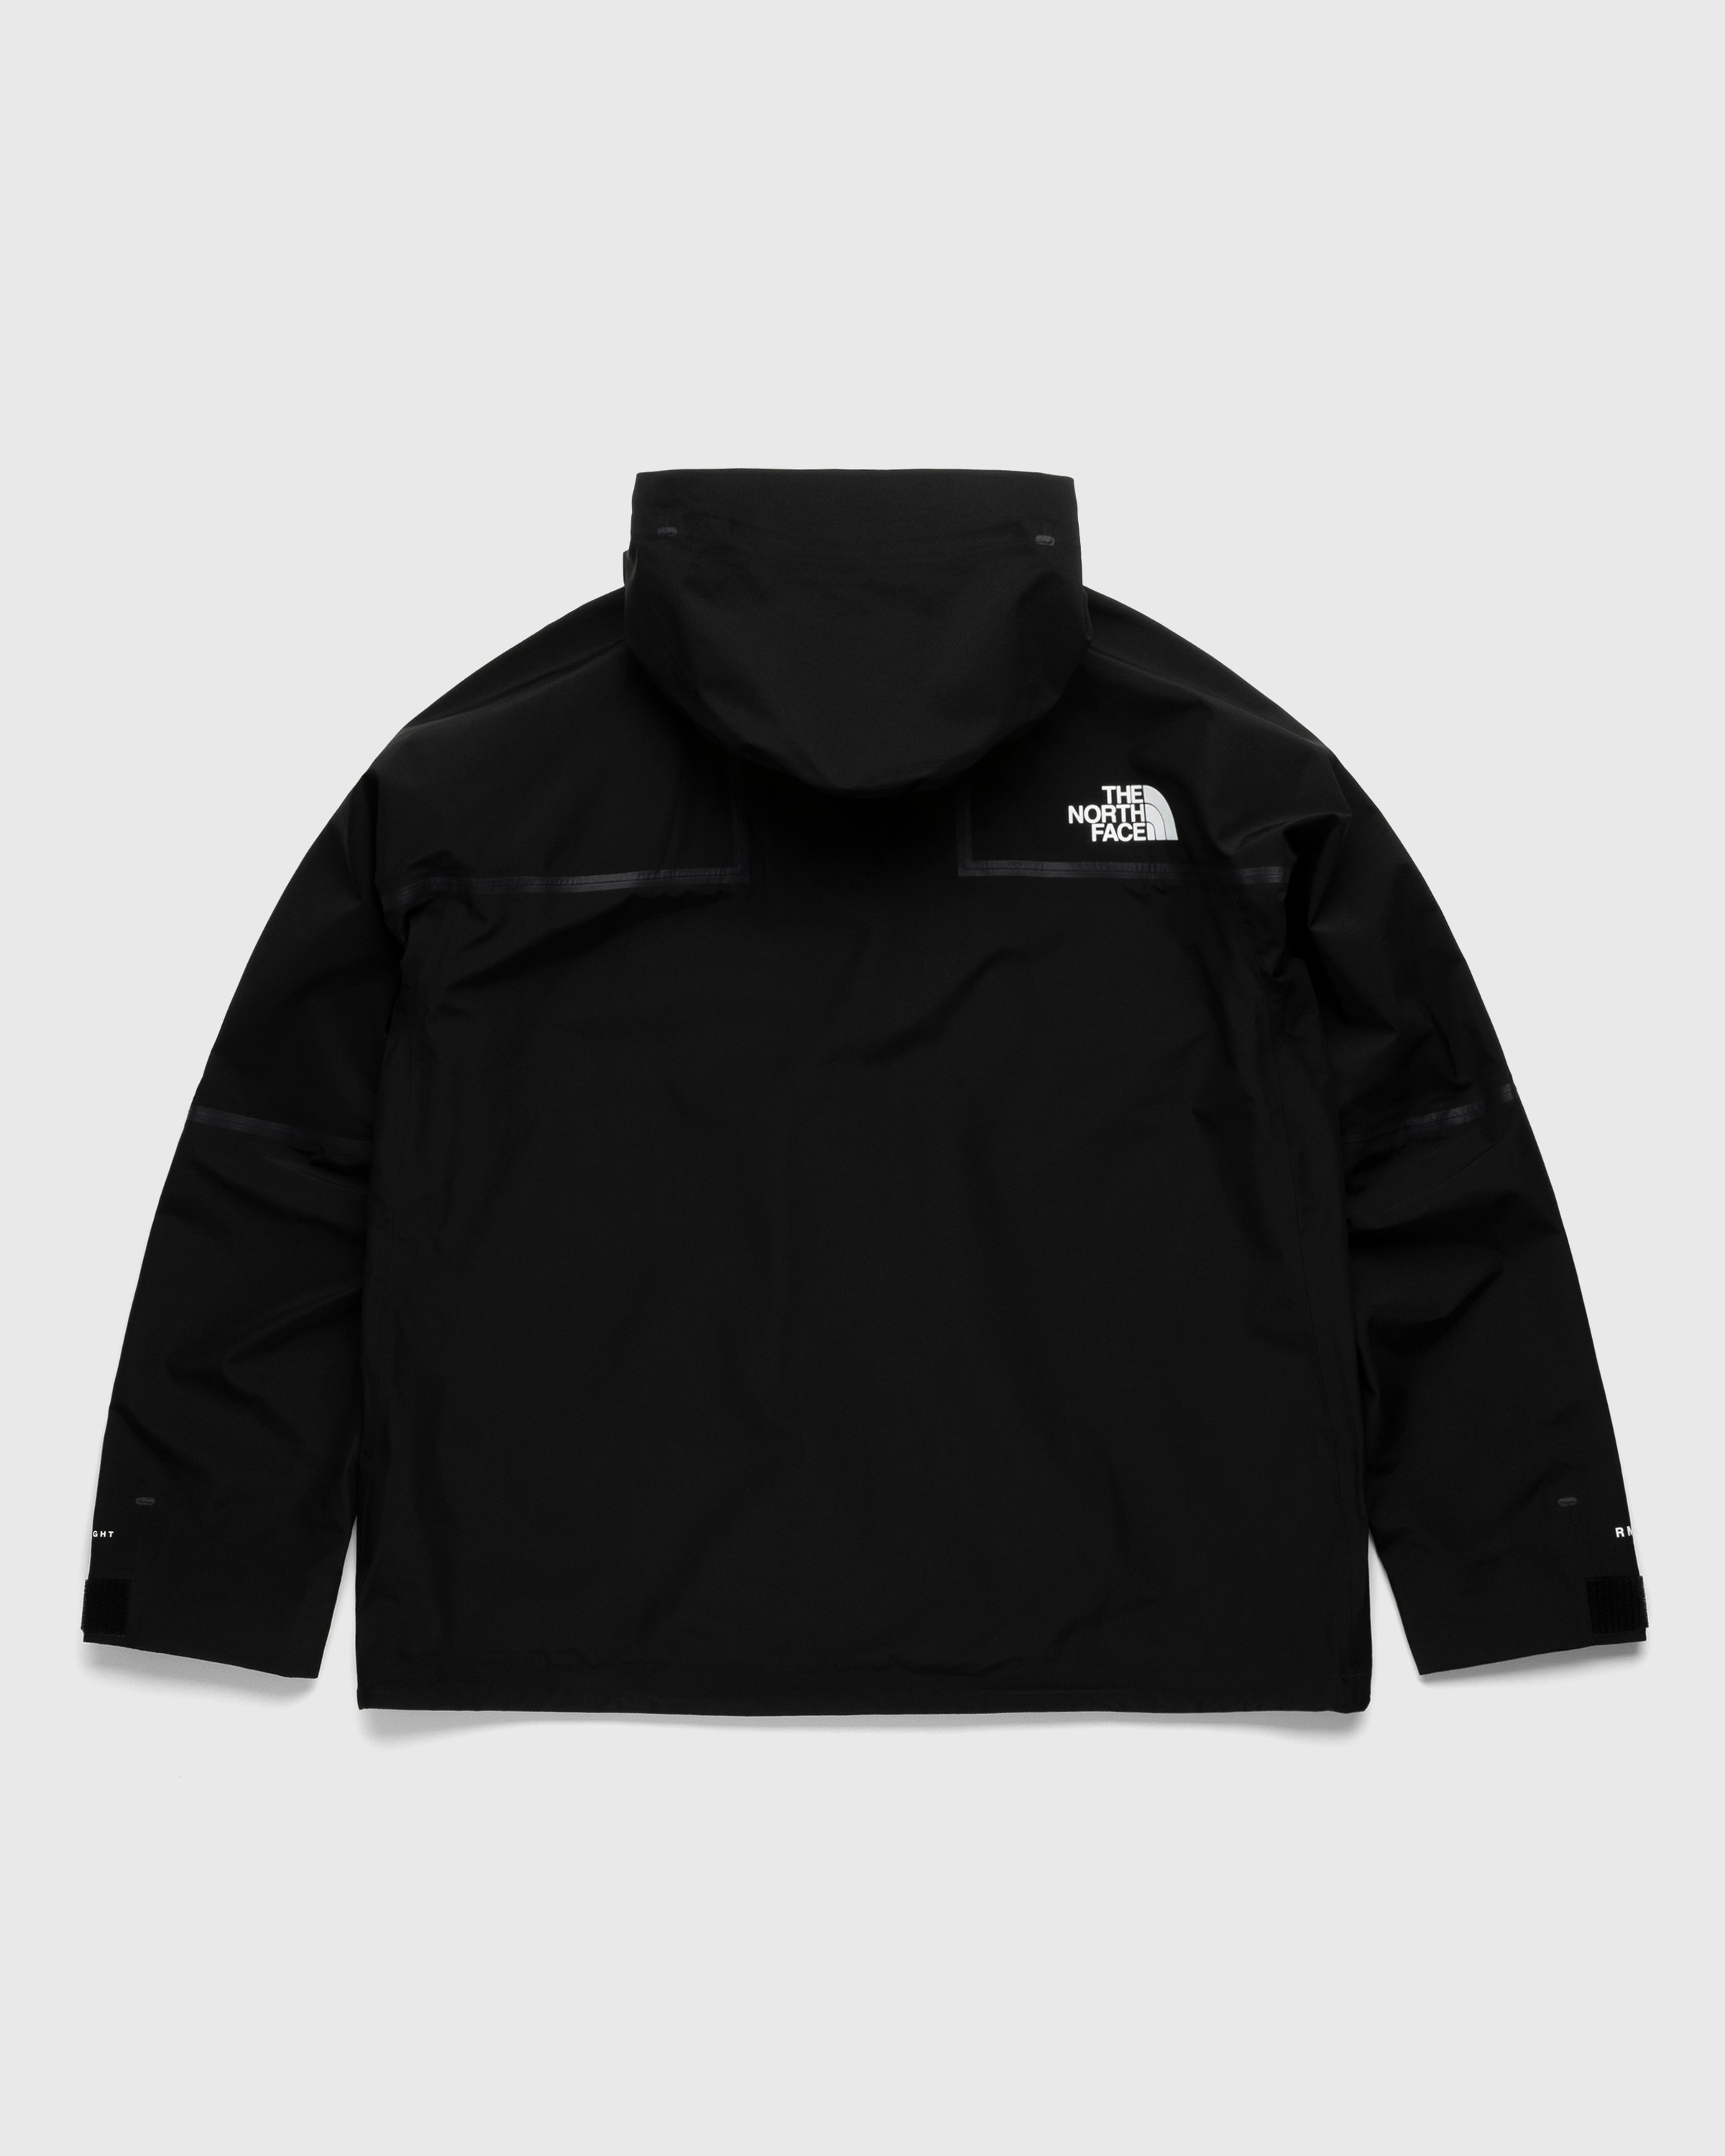 The North Face - RMST Mountain Light Futurelight Triclimate Jacket Black - Clothing - Black - Image 2